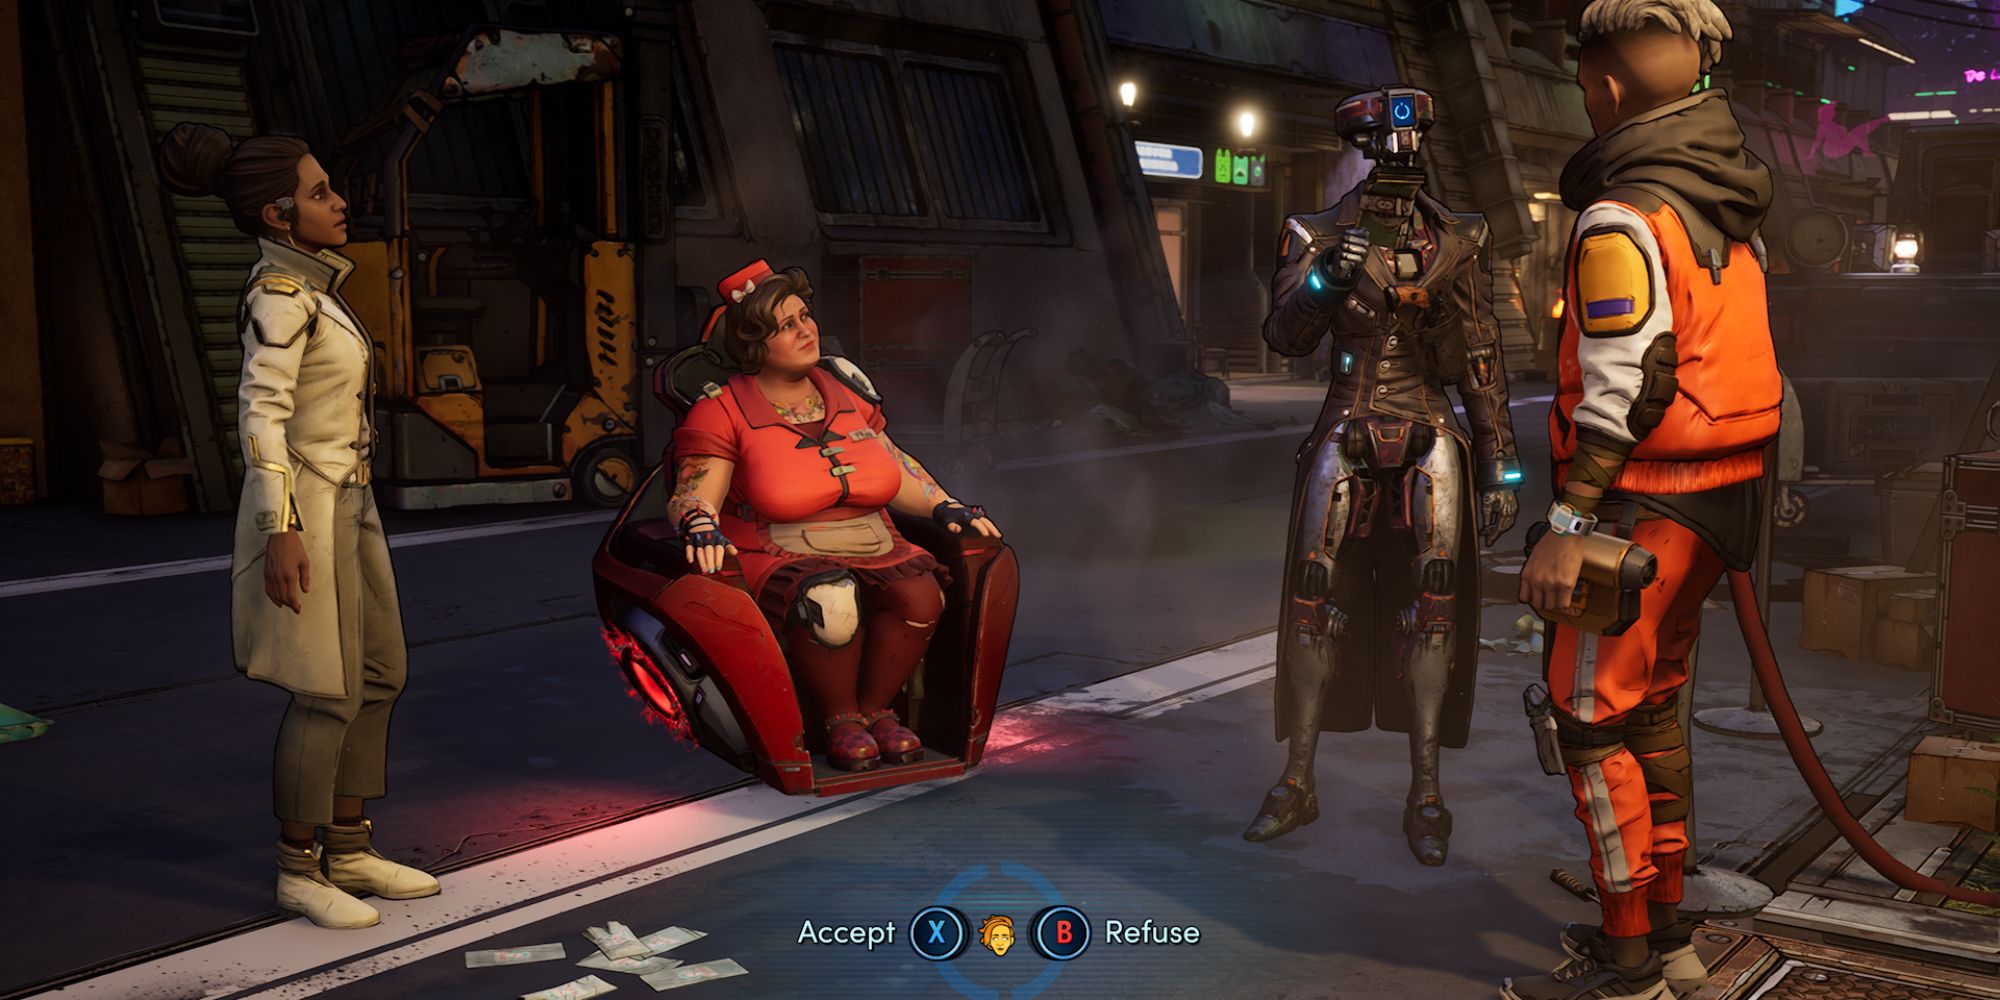 New Tales From The Borderlands Screenshot Of Accept Or Refuse Money